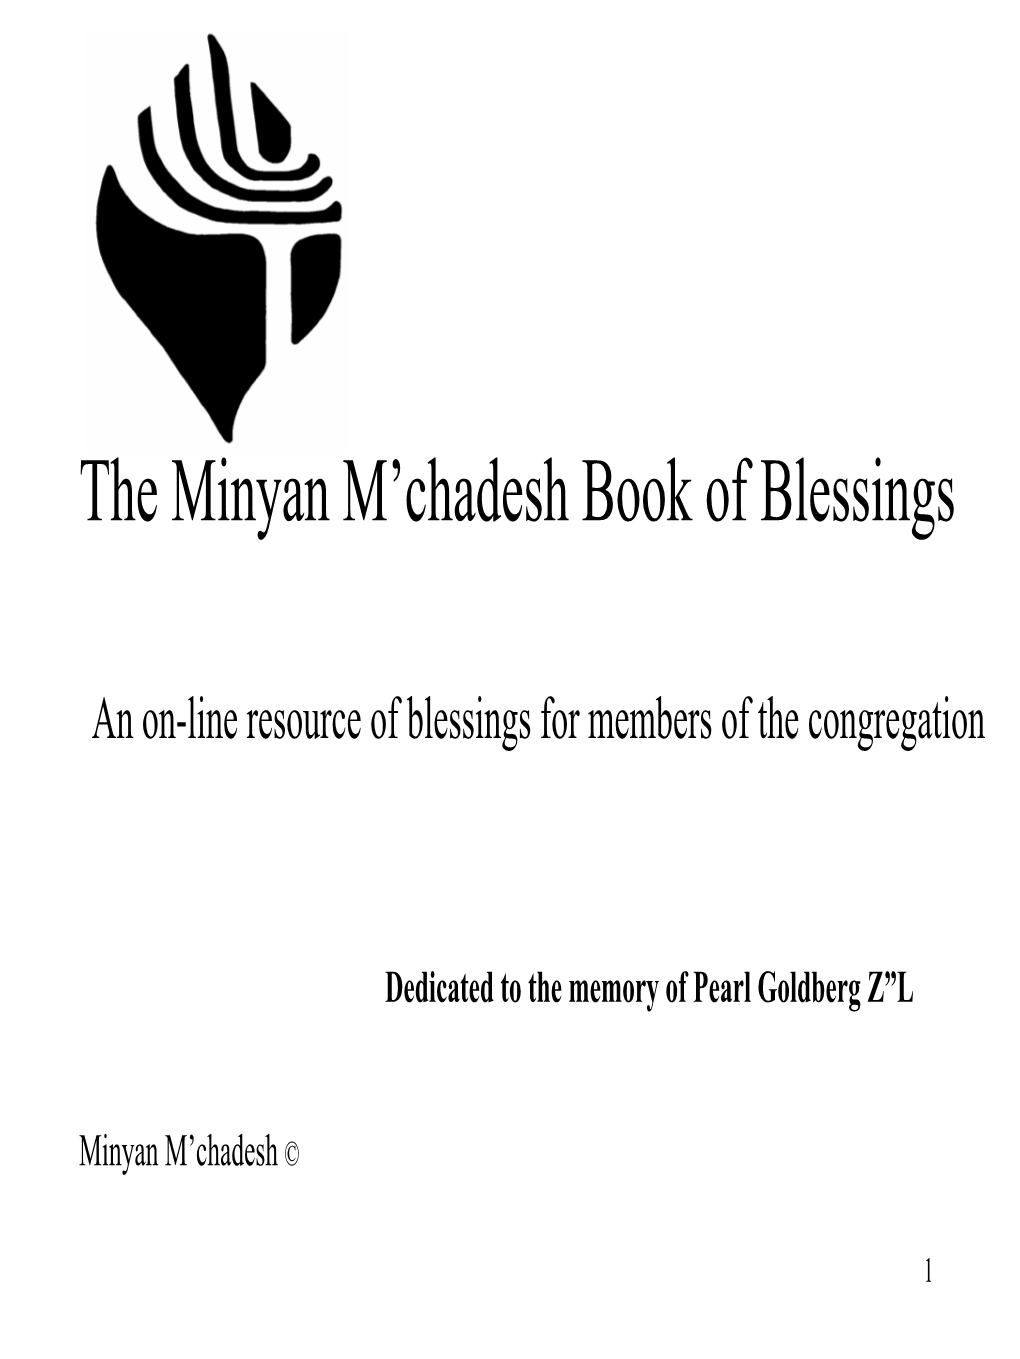 The Minyan M'chadesh Book of Blessings